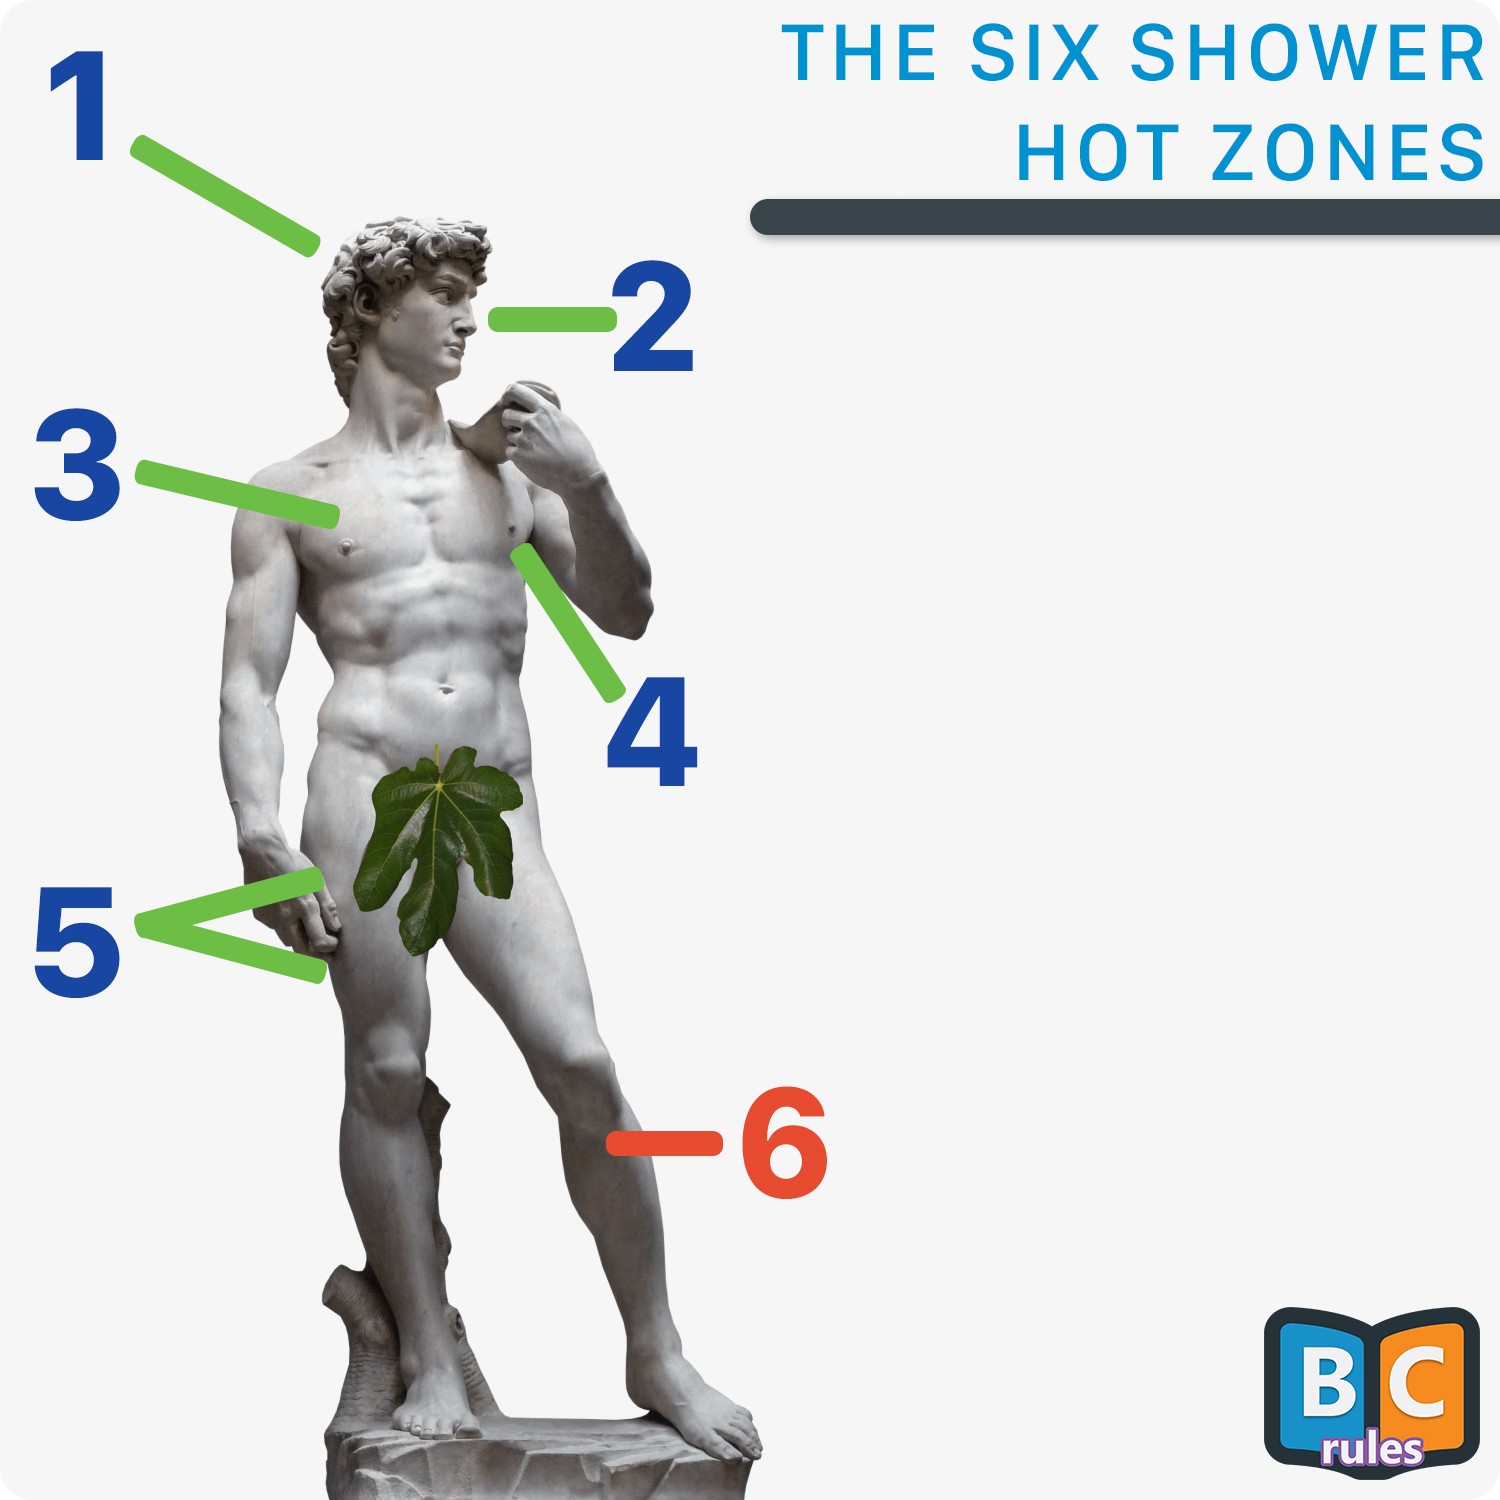 The Six Shower Hot Zones